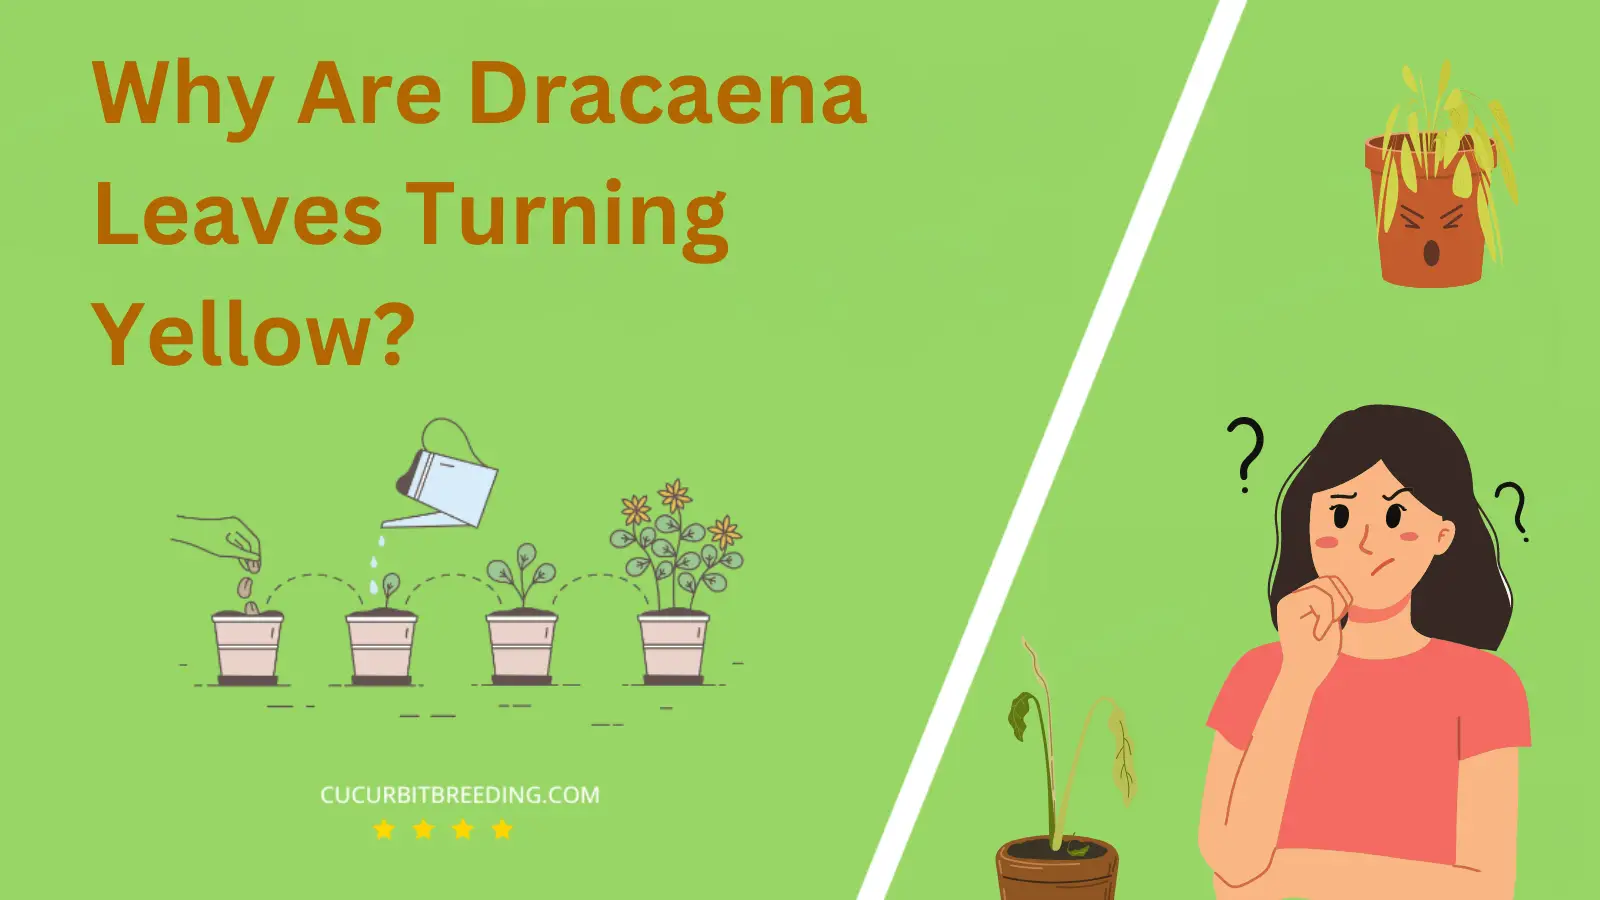 Why Are Dracaena Leaves Turning Yellow